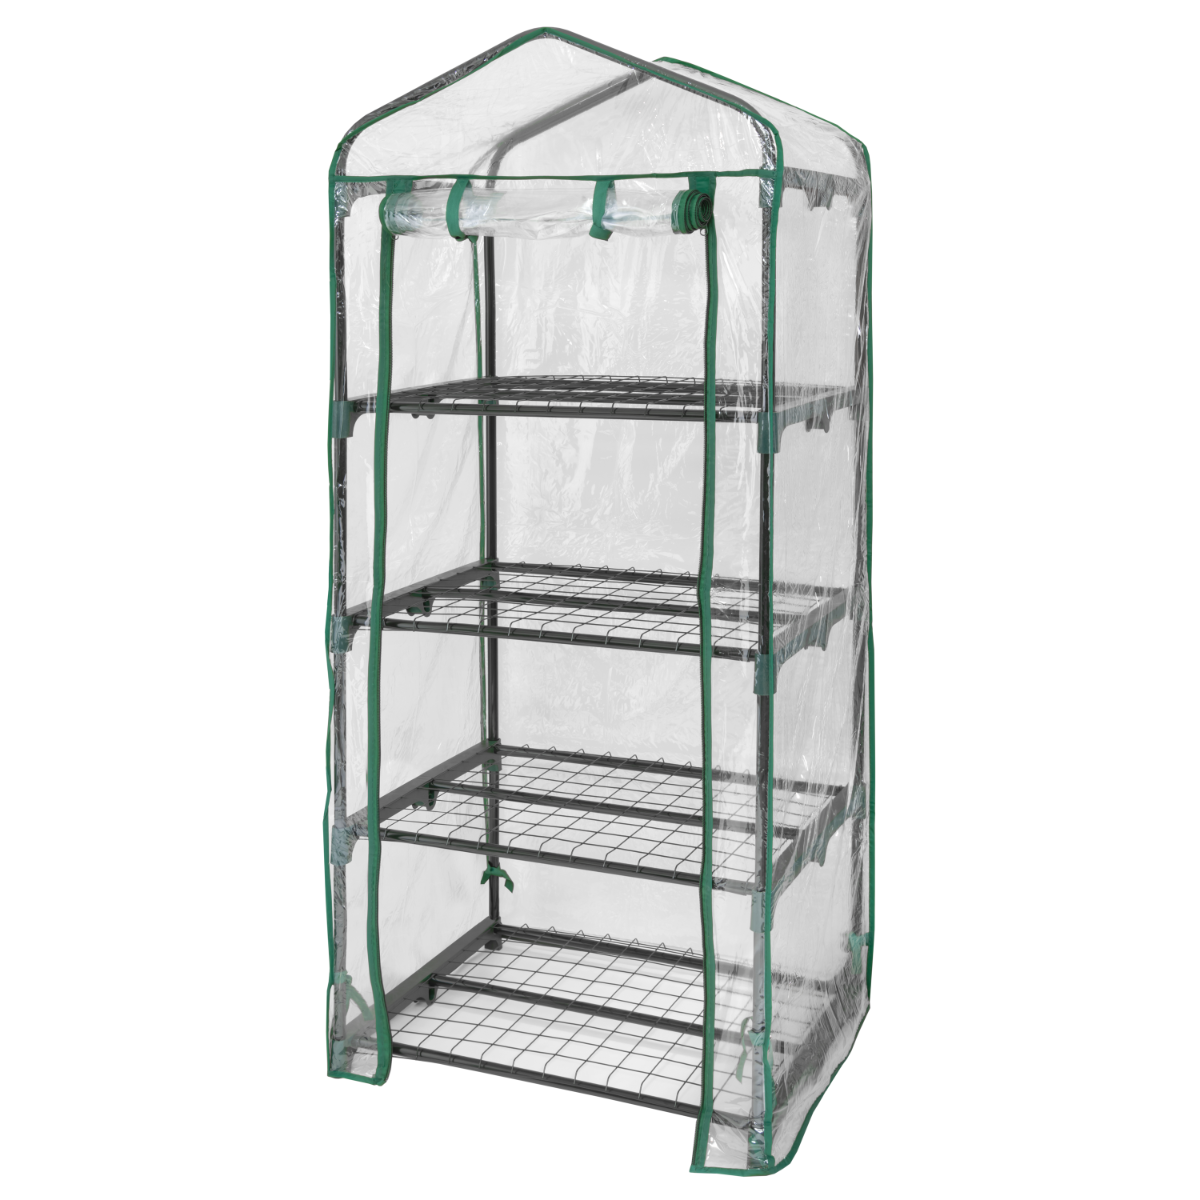 Miracle-Gro Mini Greenhouse 23 x 17 x 57” Greenhouses and Garden 70524